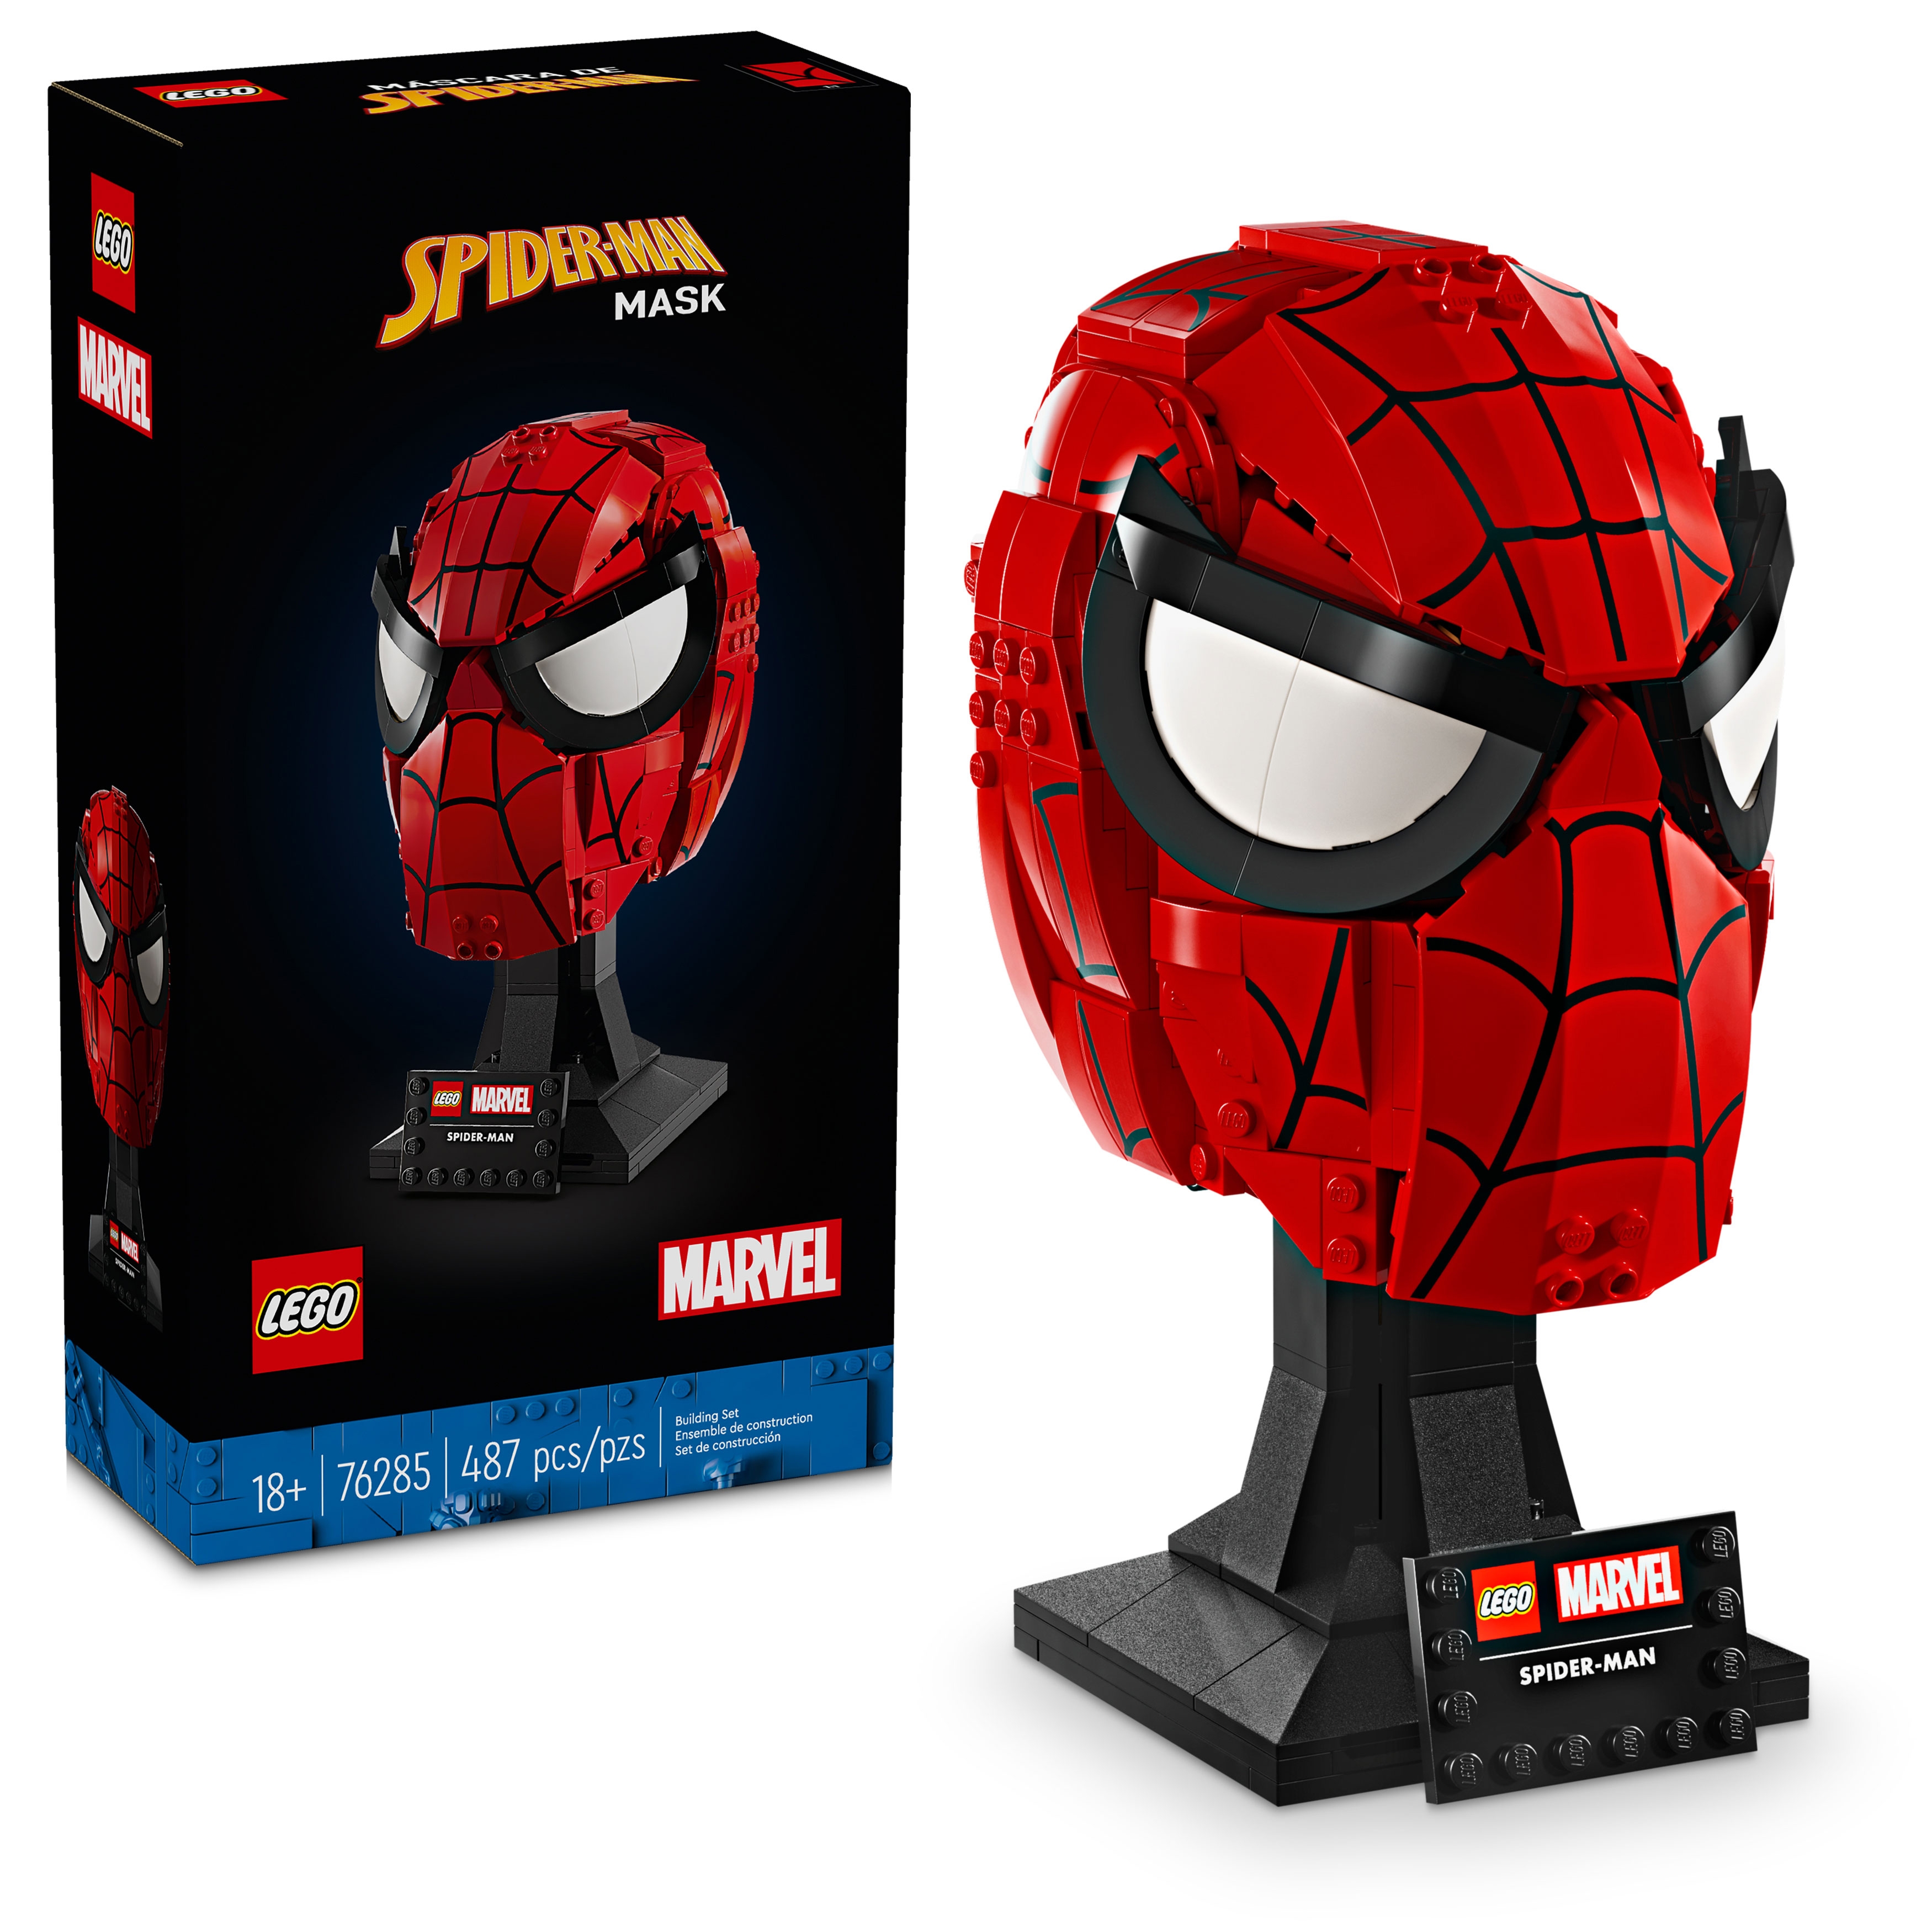 Spider-Man's Mask 76285 | Spider-Man | Buy online at the Official 